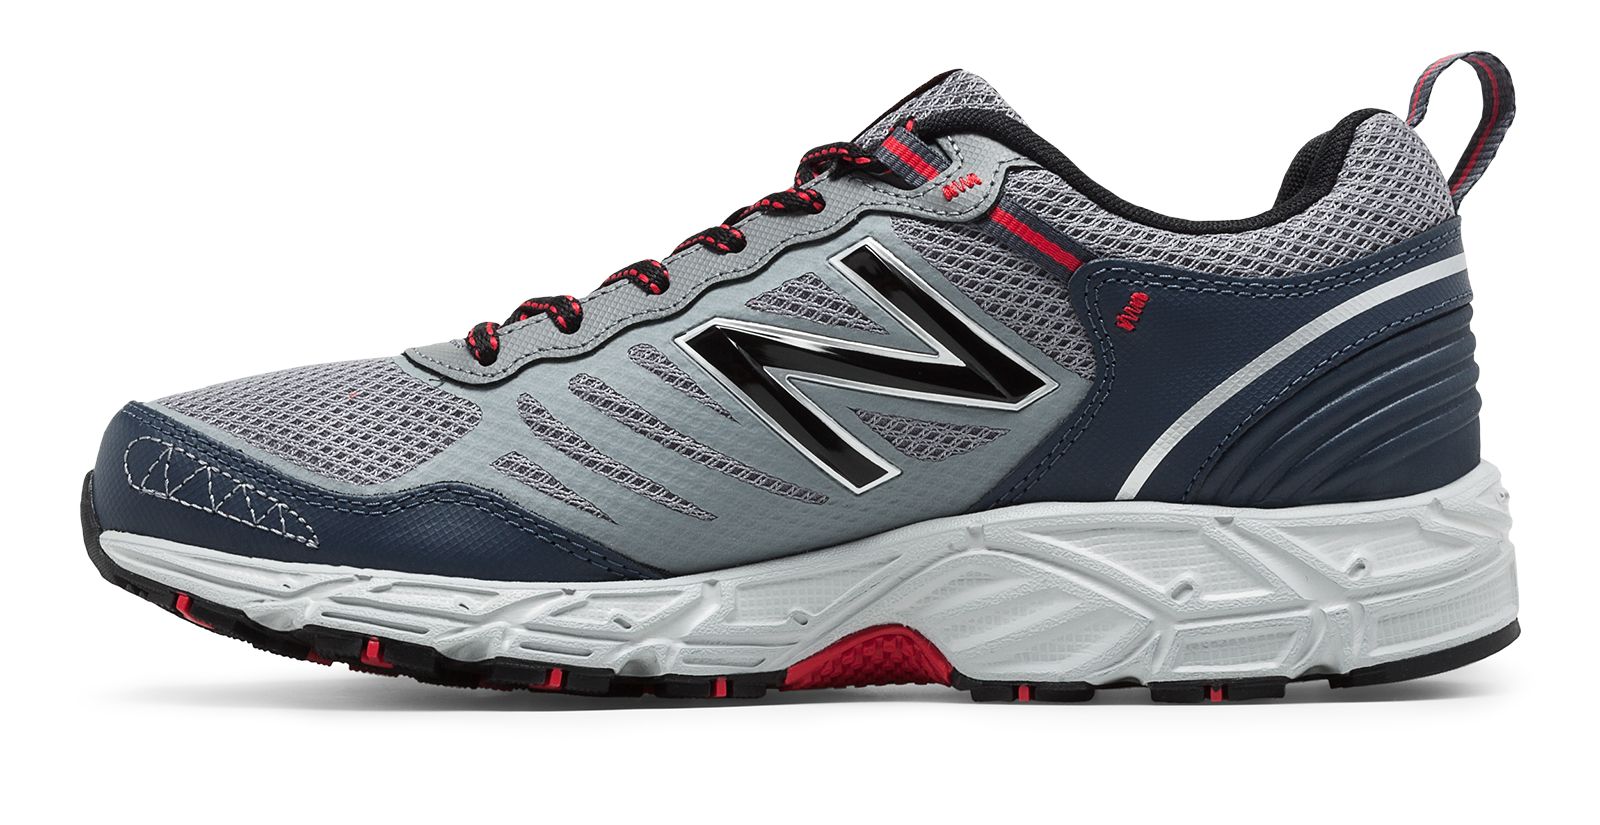 Off on MTE573T3 at Joe's New Balance Outlet